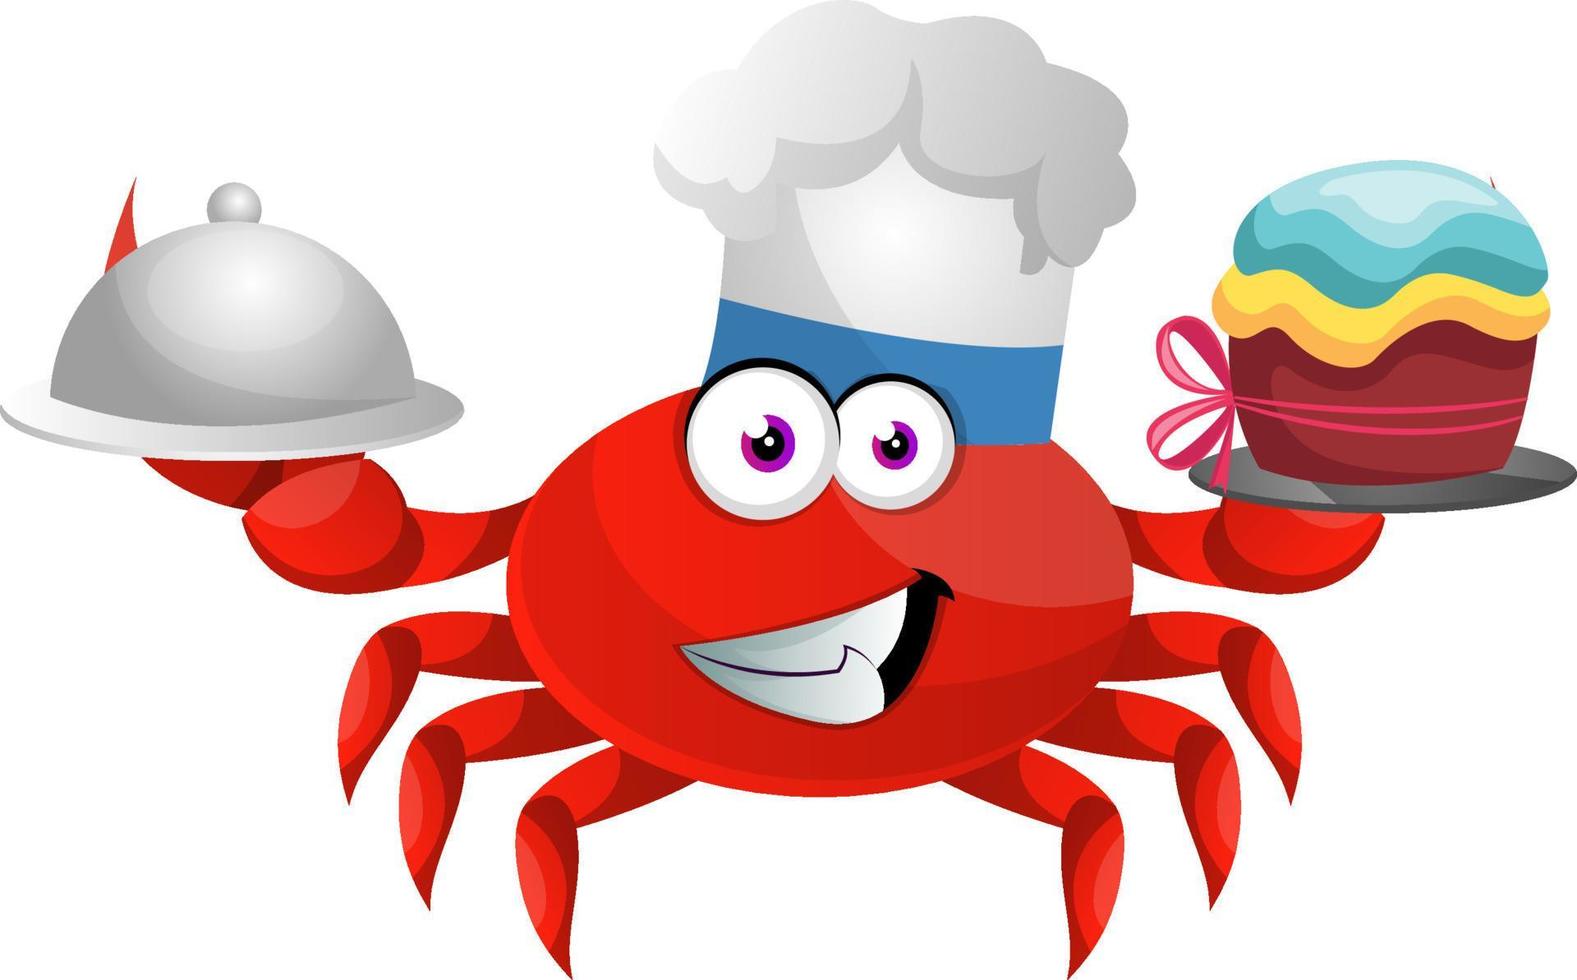 Crab with birthday cake, illustration, vector on white background.